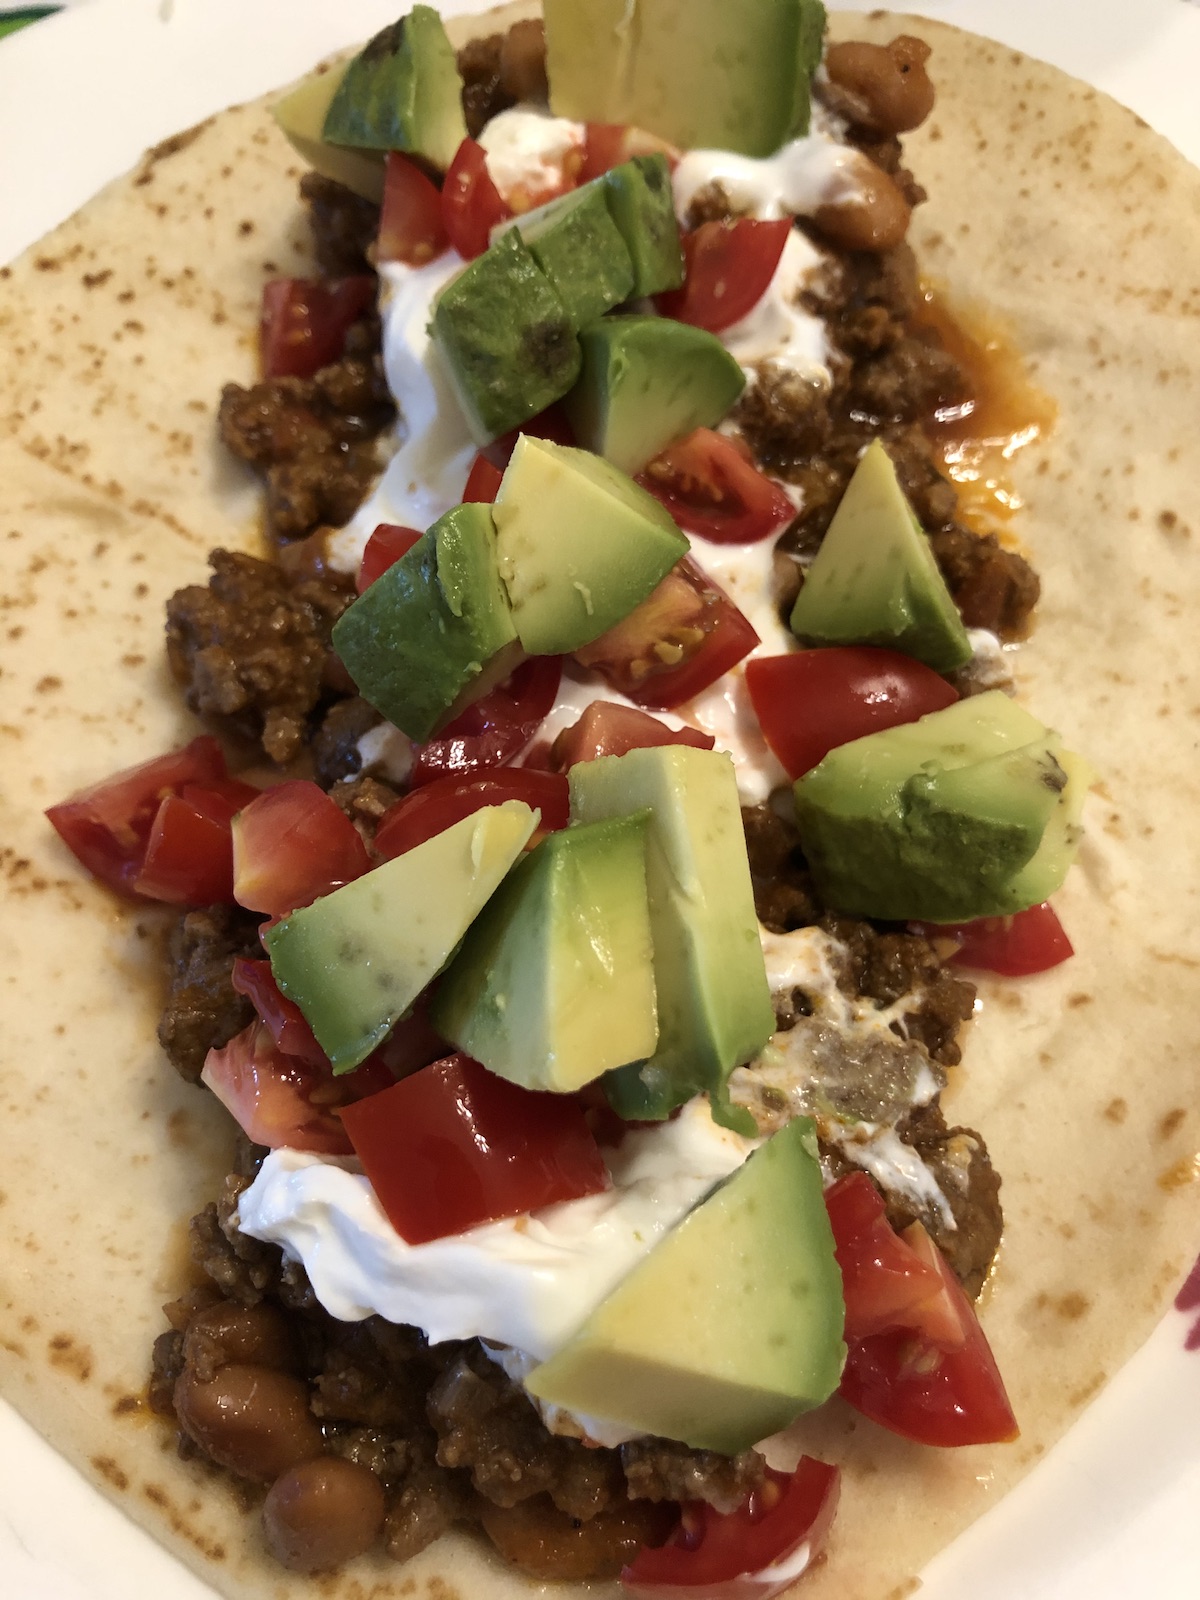 Taco Meat and Beans with avocado, tomato & sour cream on a flour tortilla